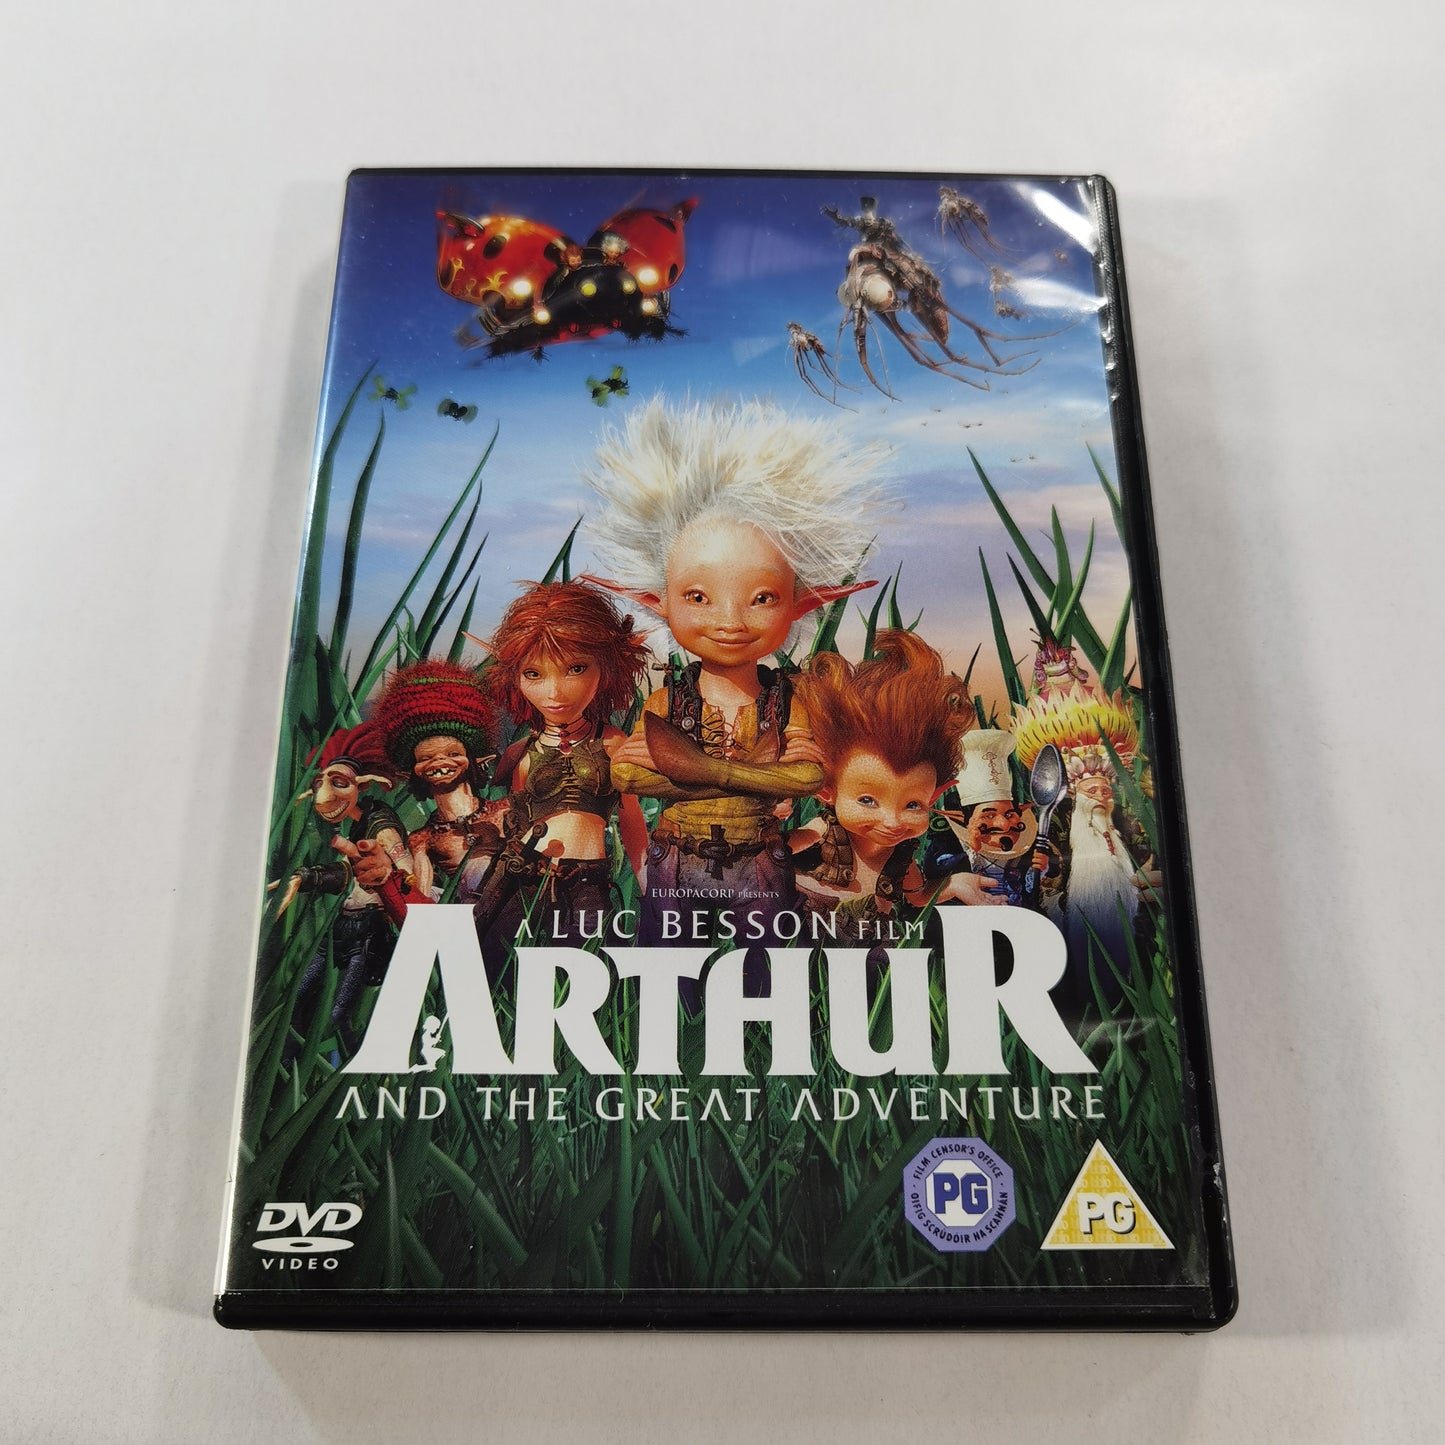 Arthur And The Great Adventure (2009) - DVD UK